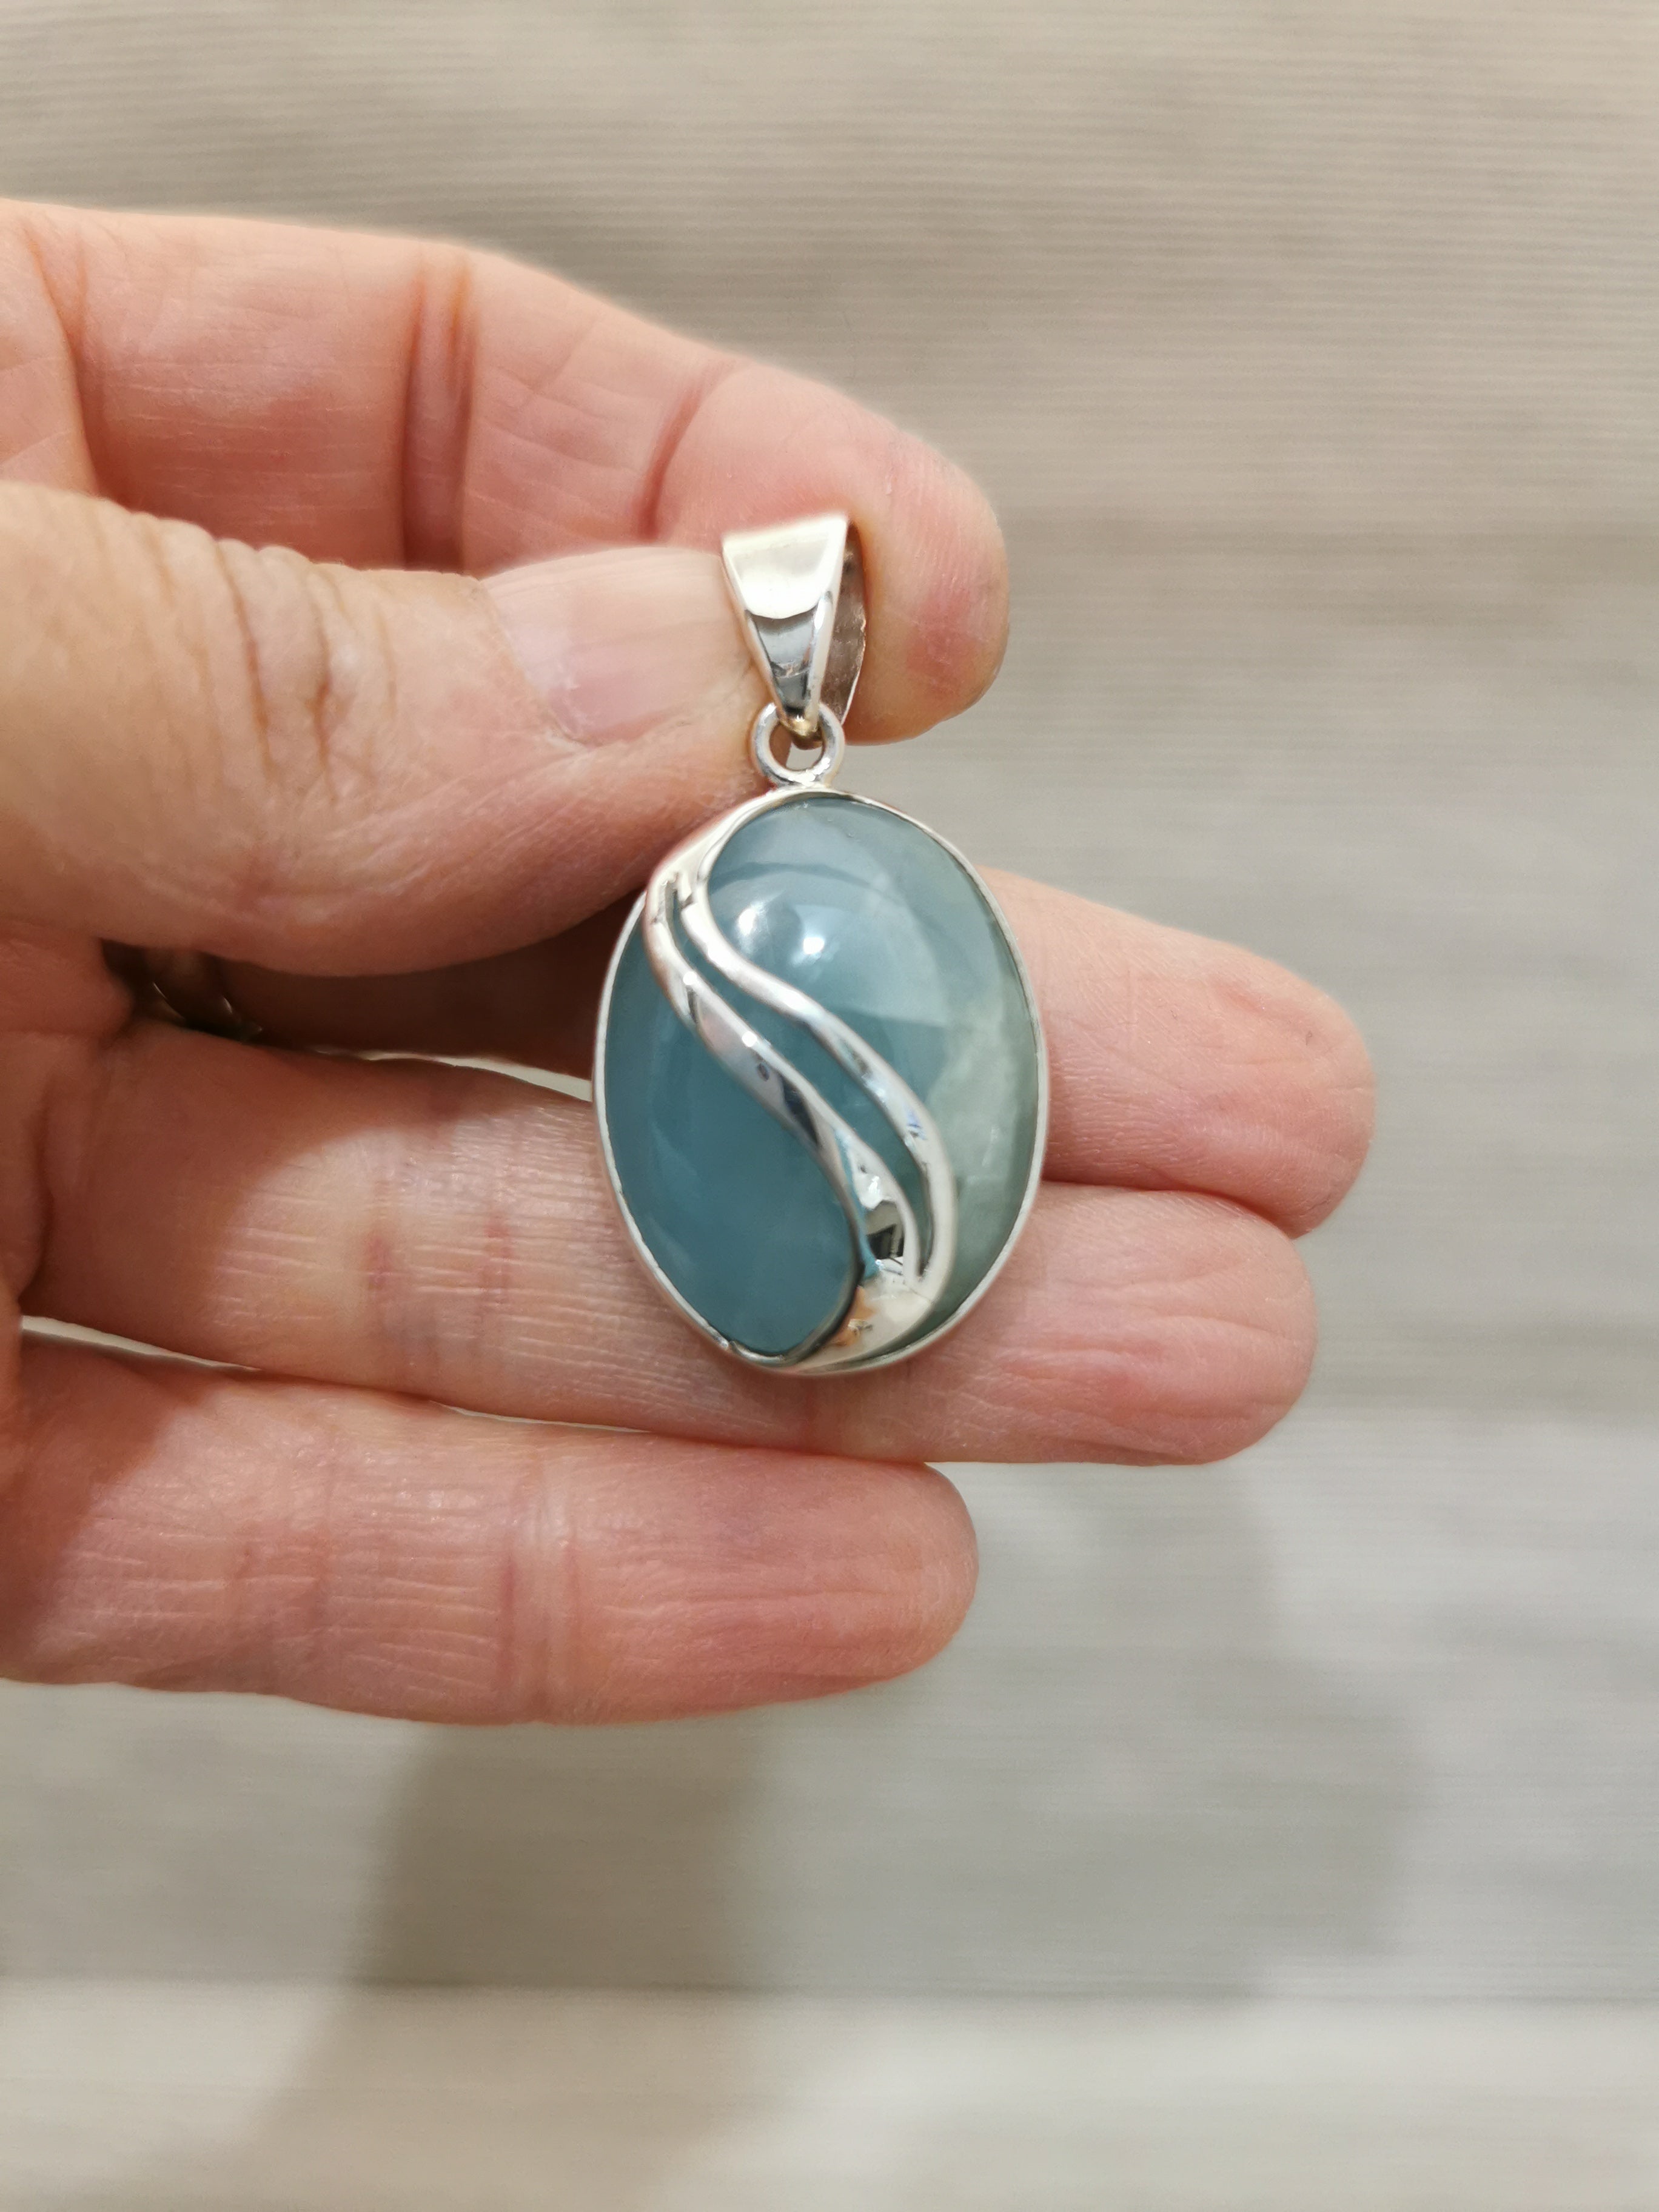 Aquamarine Oval Pendant - 925 Sterling Silver with Decorative Wave Pattern